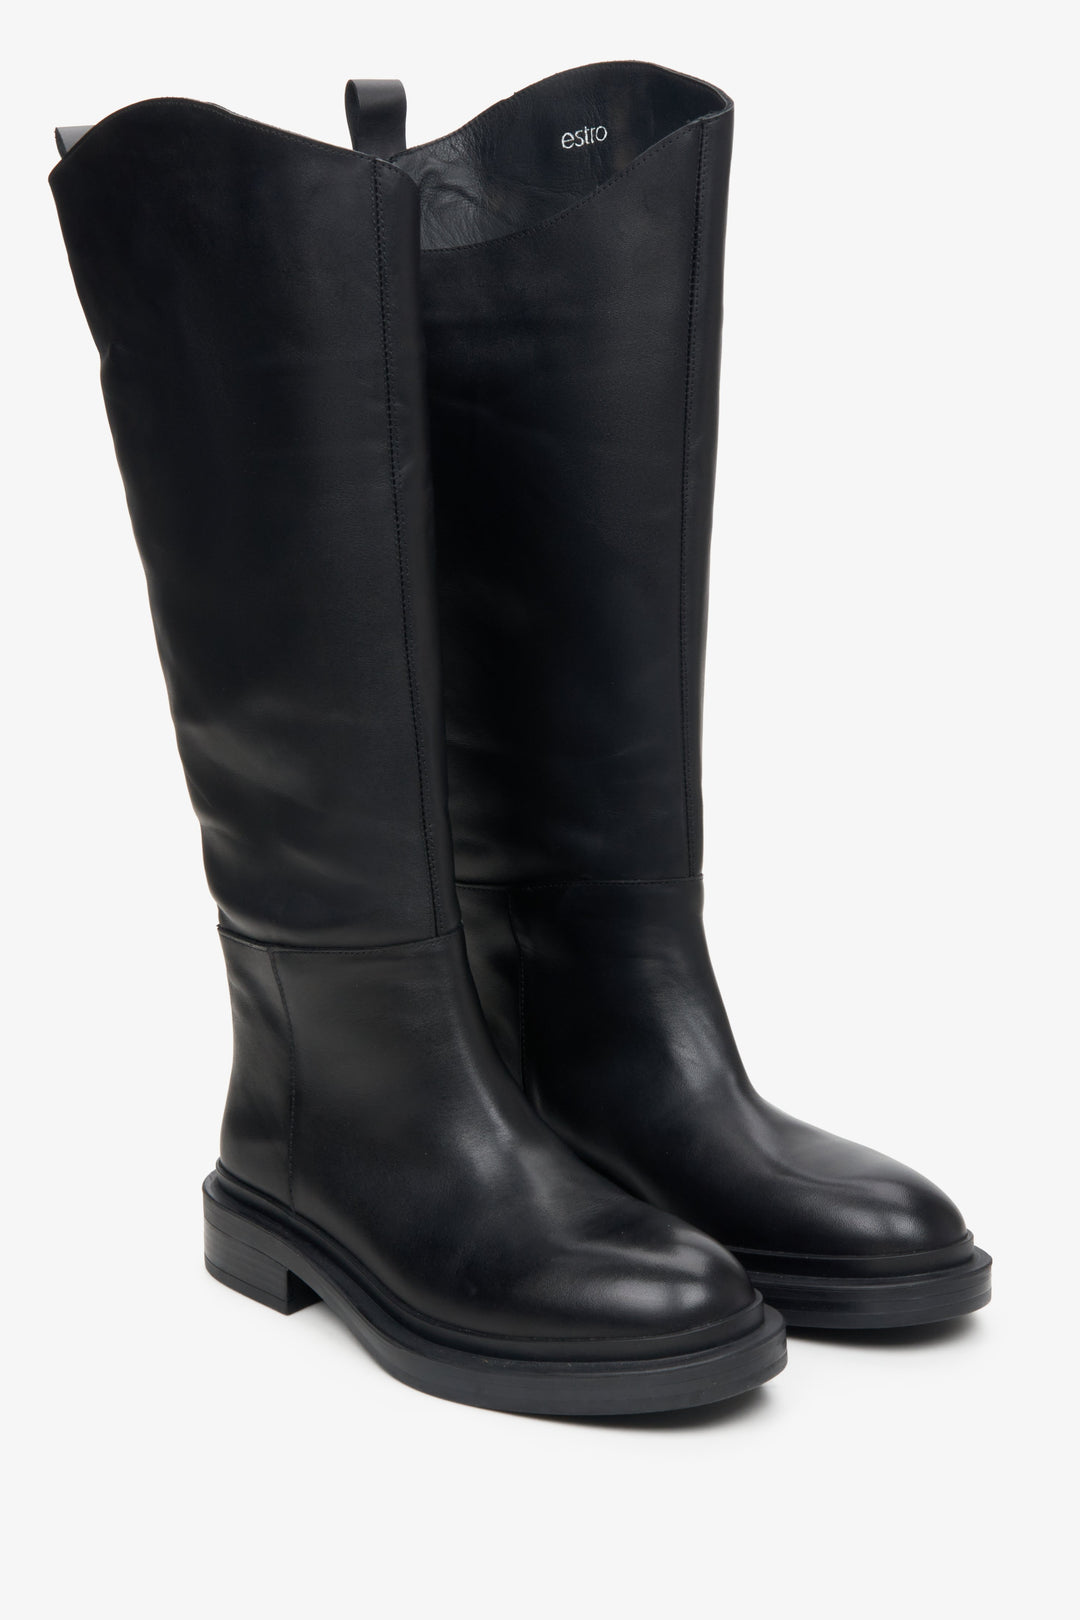 Black leather wide-calf boots.